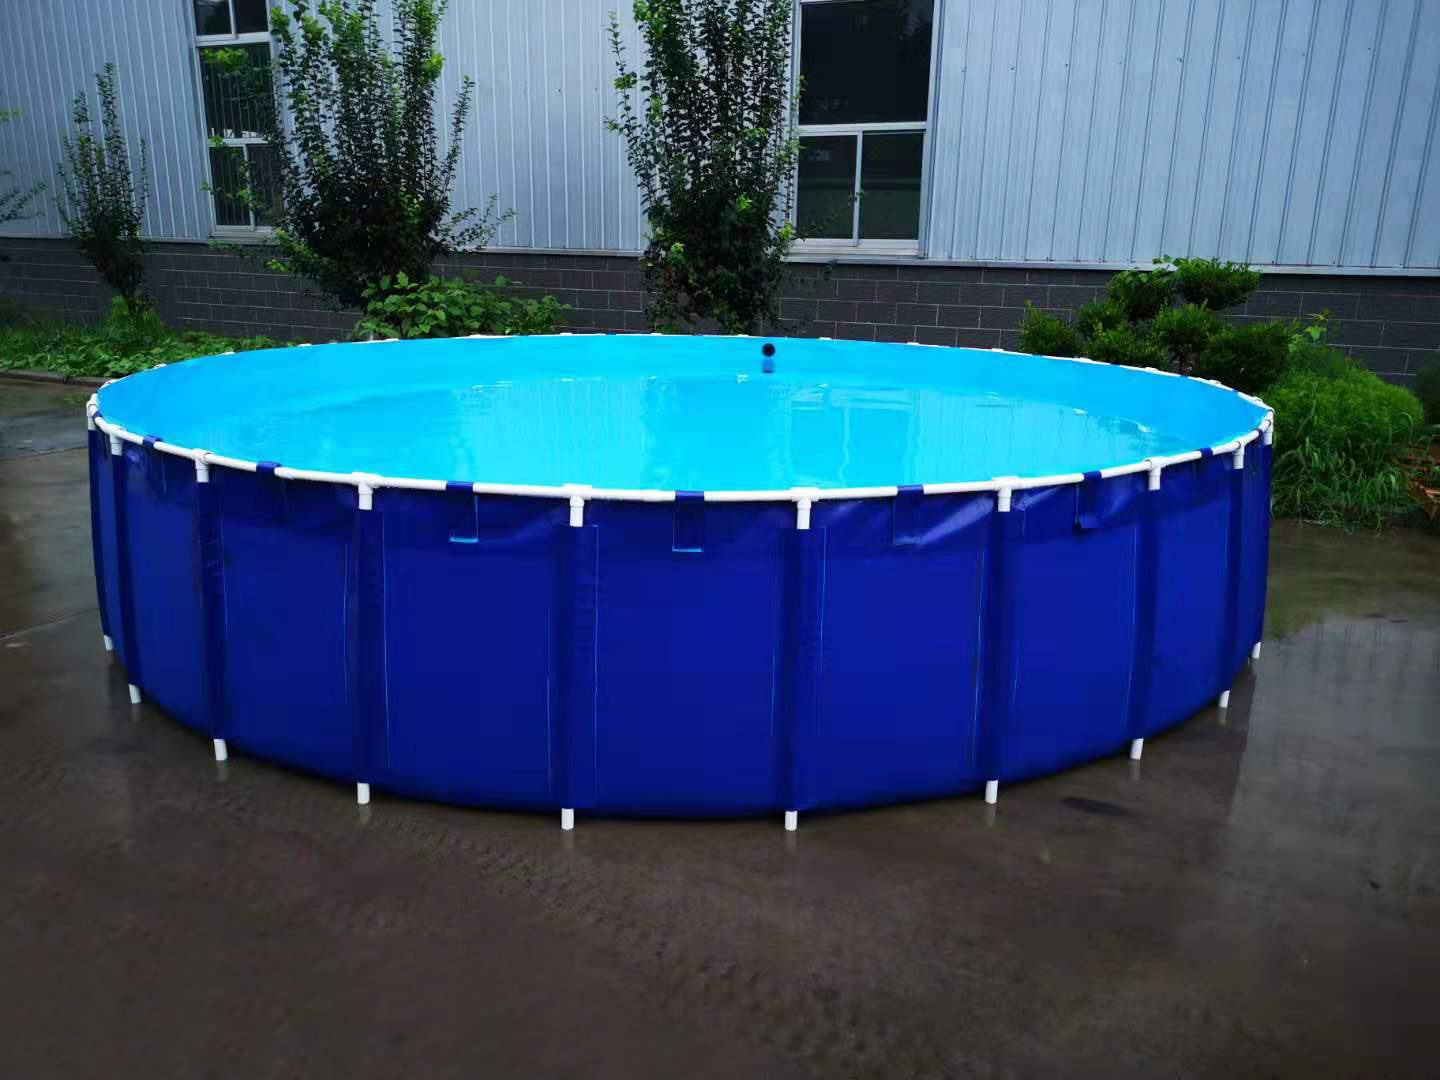 Collapsible Fish Breeding Tank Round PVC Tarpaulin For Fish Tank Supplier In China